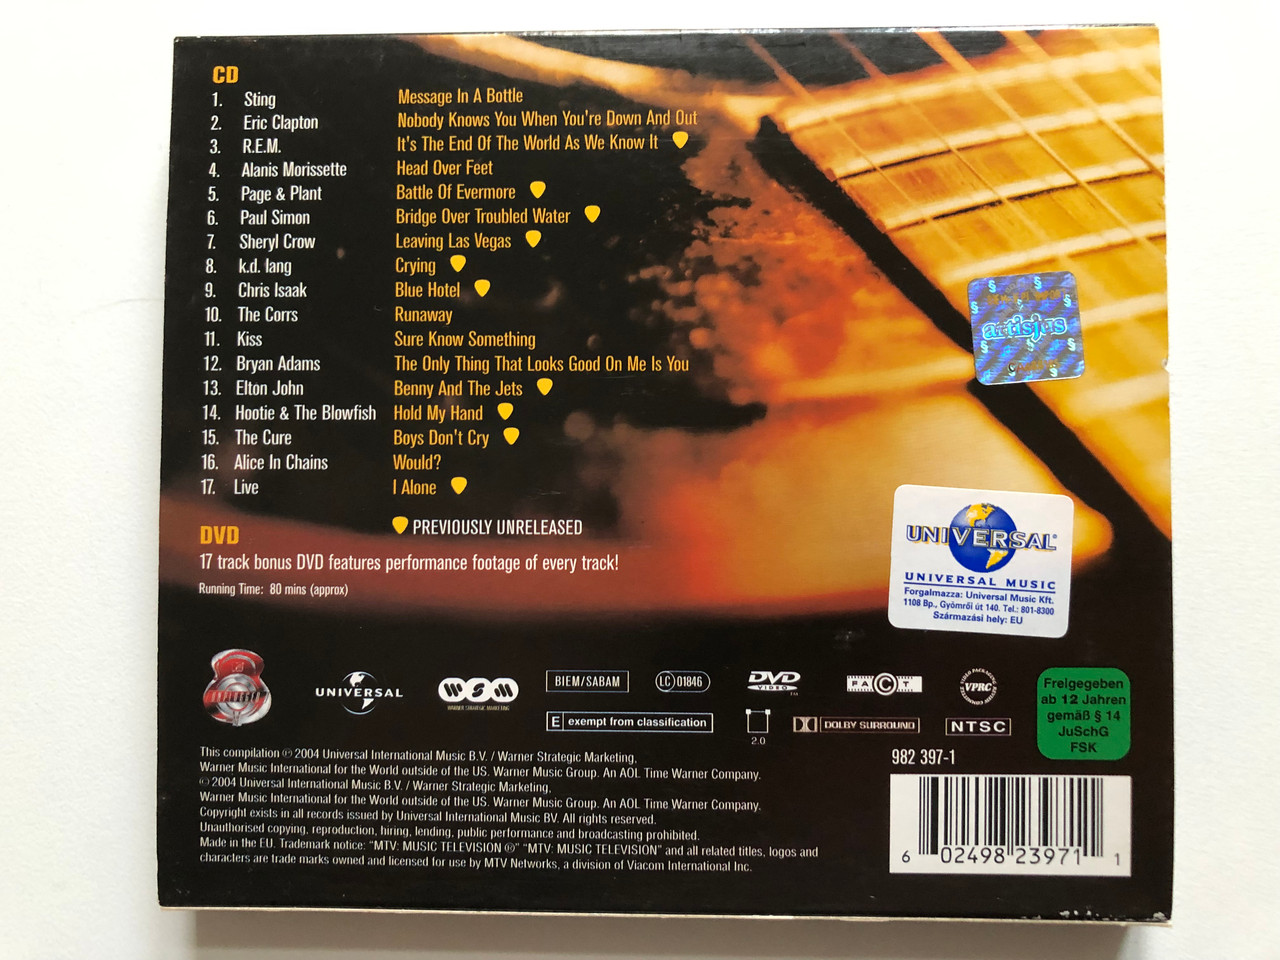 The Very Best Of MTV Unplugged 3 / Sting, R. E. M., Bryan Adams, Alanis  Morissette, Page & Plant, Elton John, And many more / MTV Music Television  Audio CD + DVD Video 2004 / 982 397-1 - bibleinmylanguage